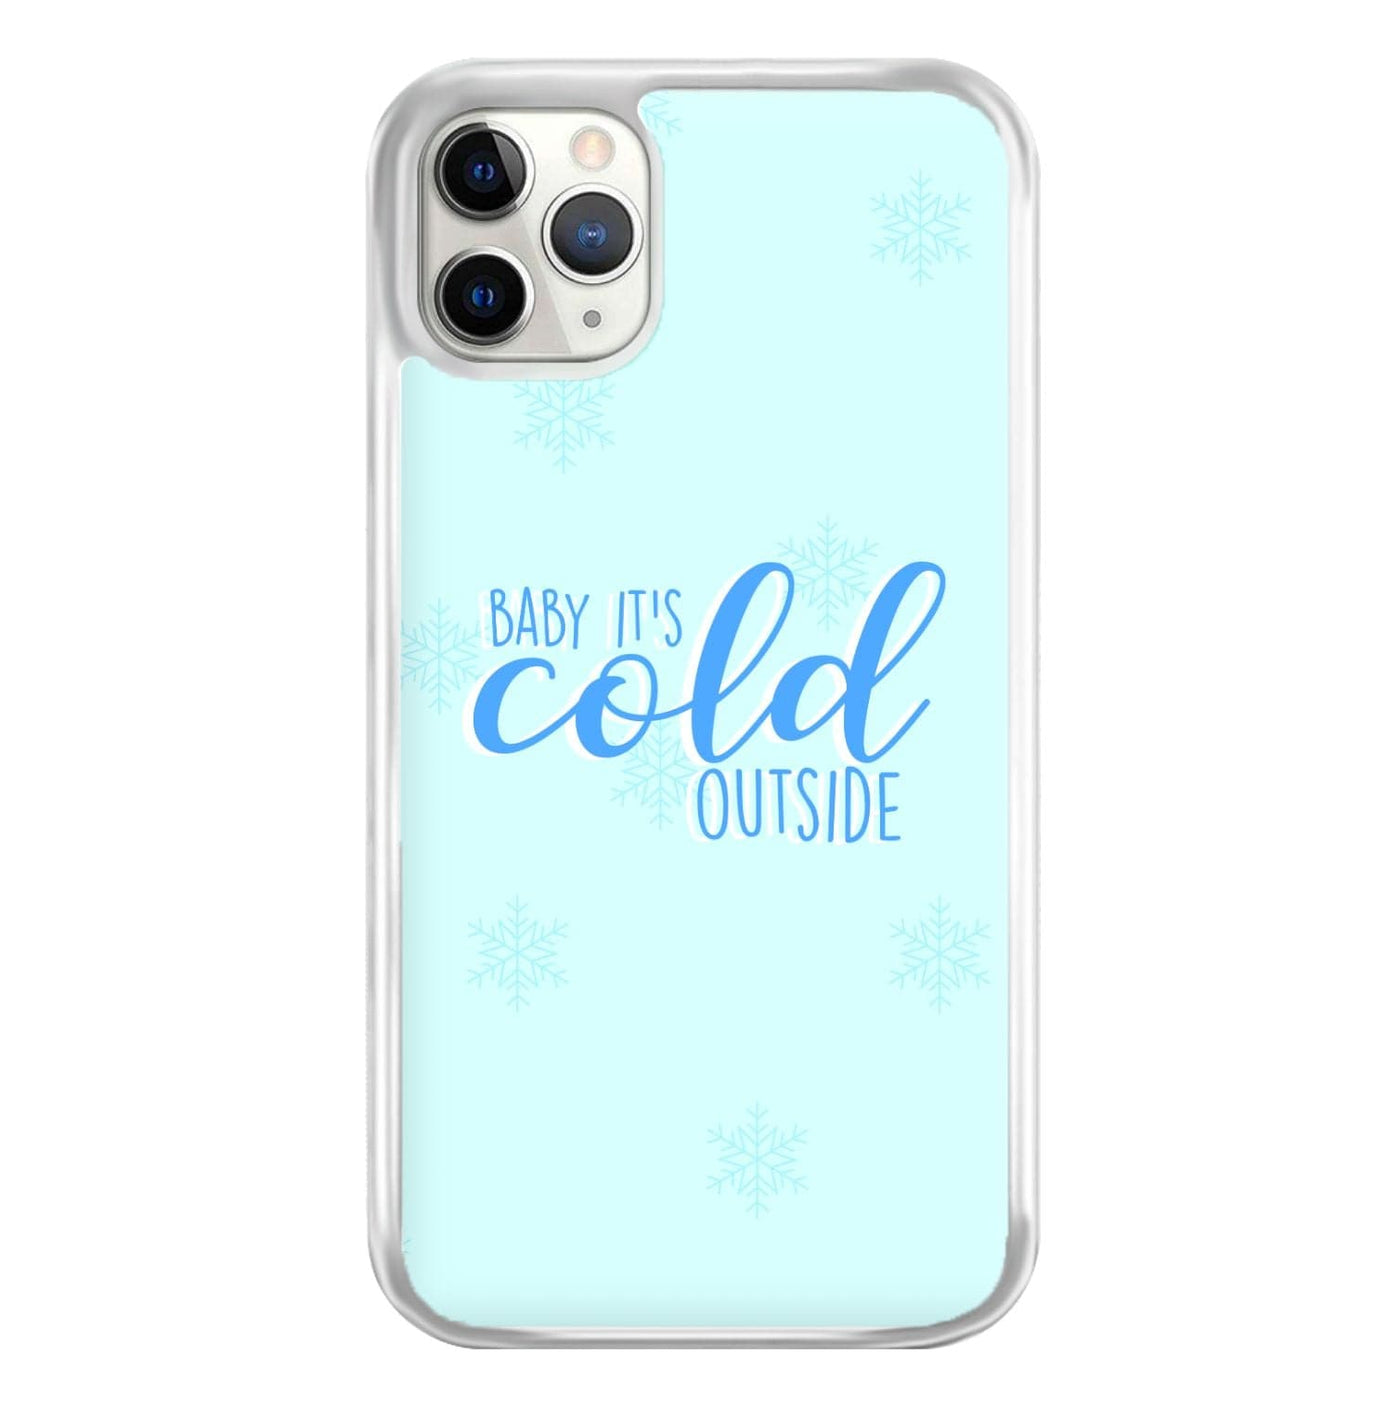 Baby It's Cold Outside - Christmas Songs Phone Case